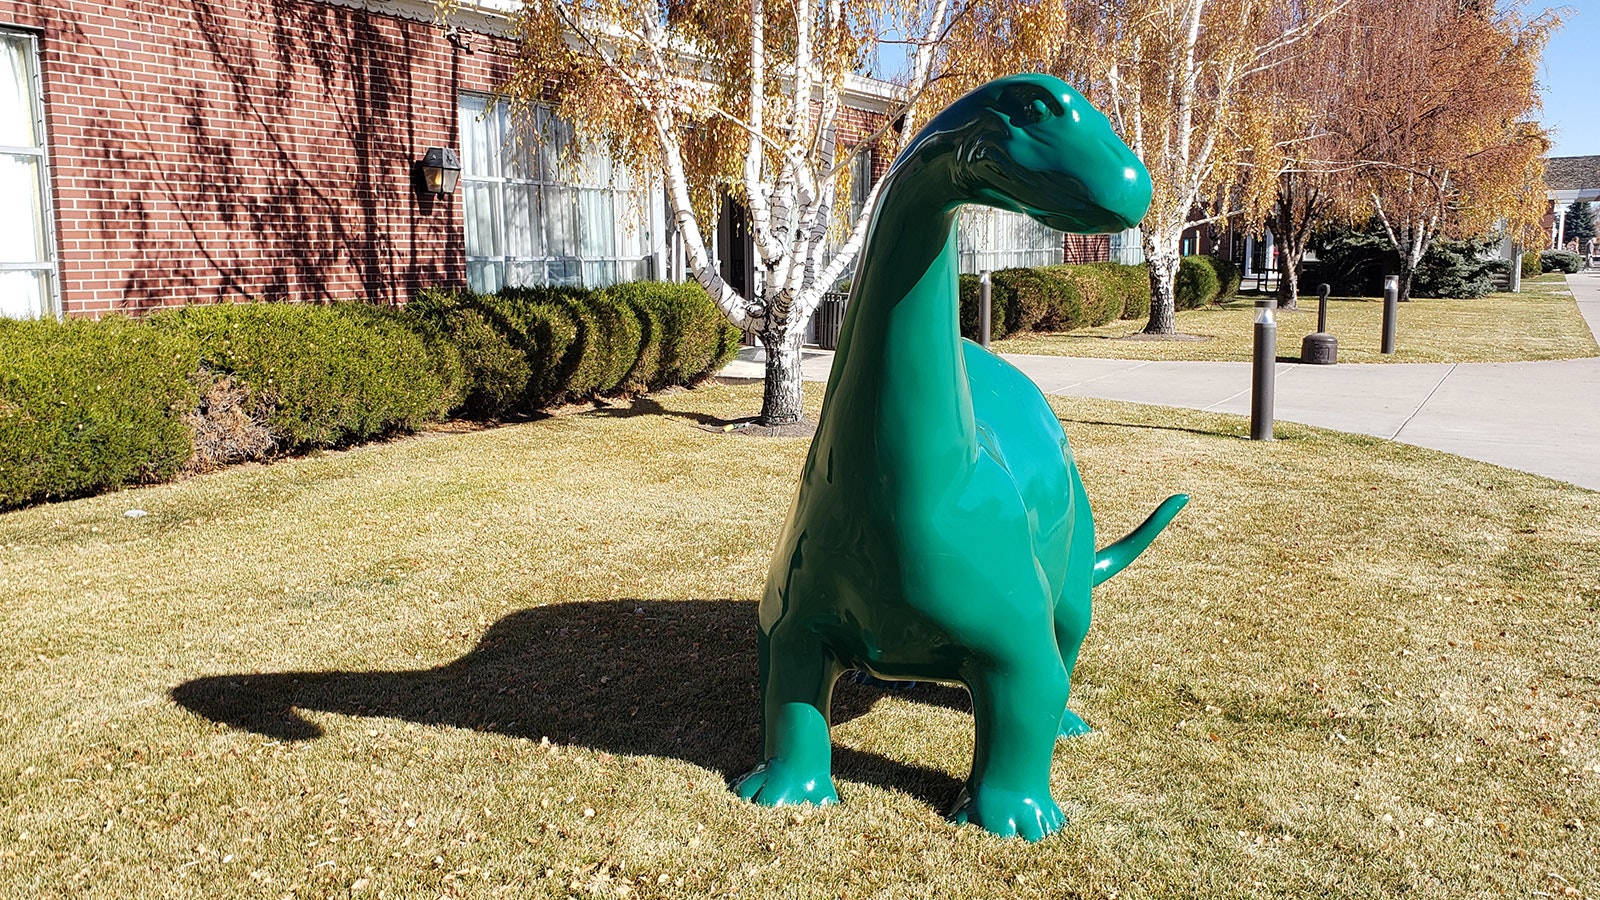 There's a reason this cute brontosaurus is sitting in front to the hotel registration building. The hotel owners are the Holdings, who own Sinclair.